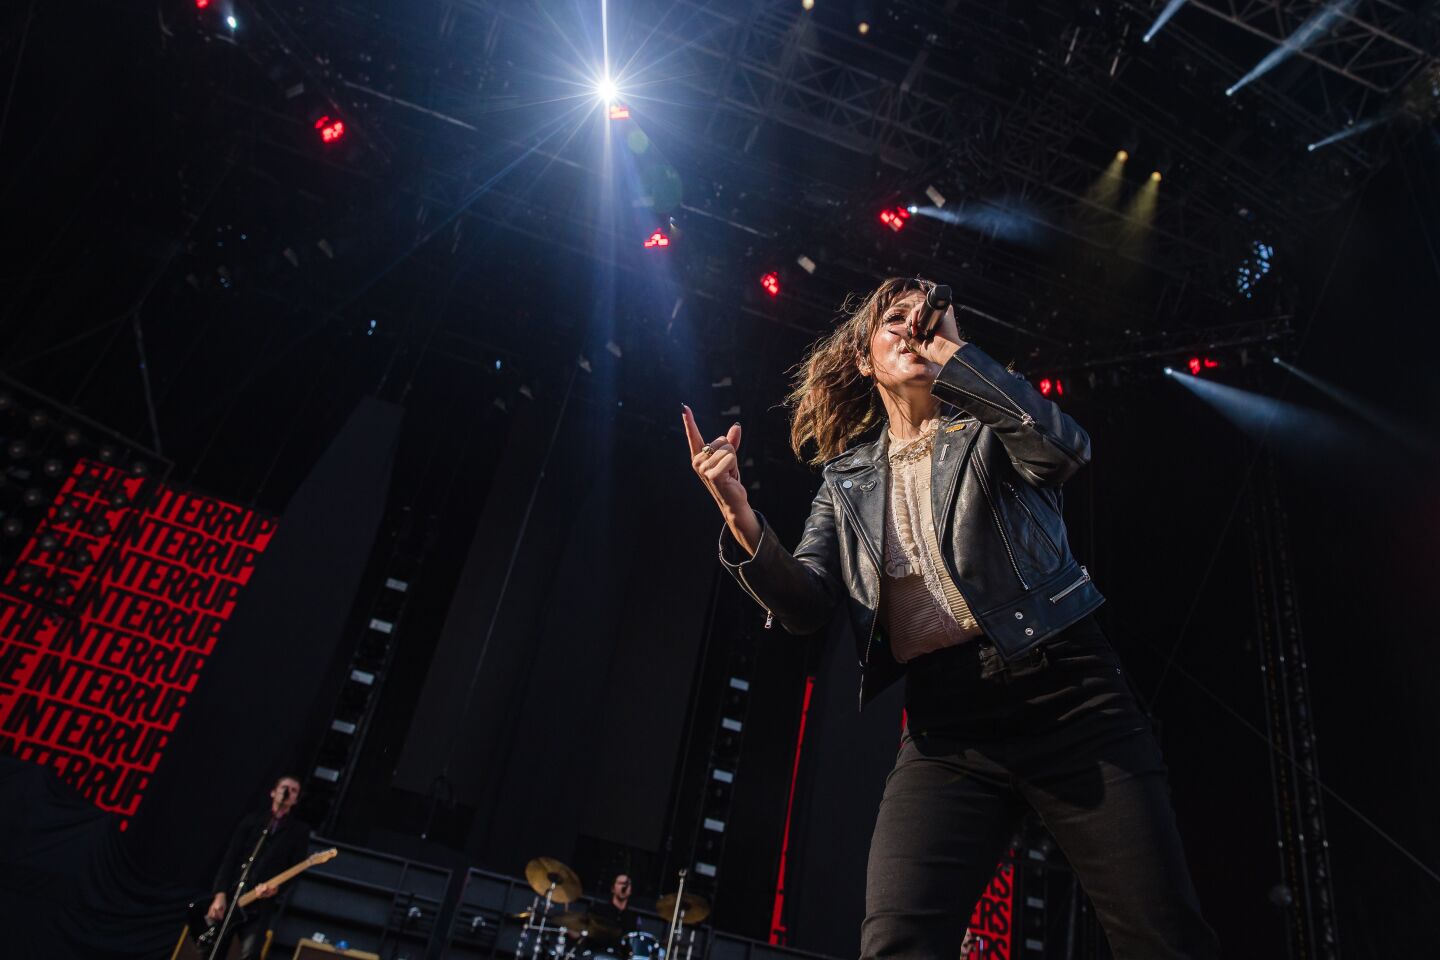 Aimee Allen from The Interrupters sings at Petco Park during the Hella Mega Tour in downtown San Diego on August 29, 2021.